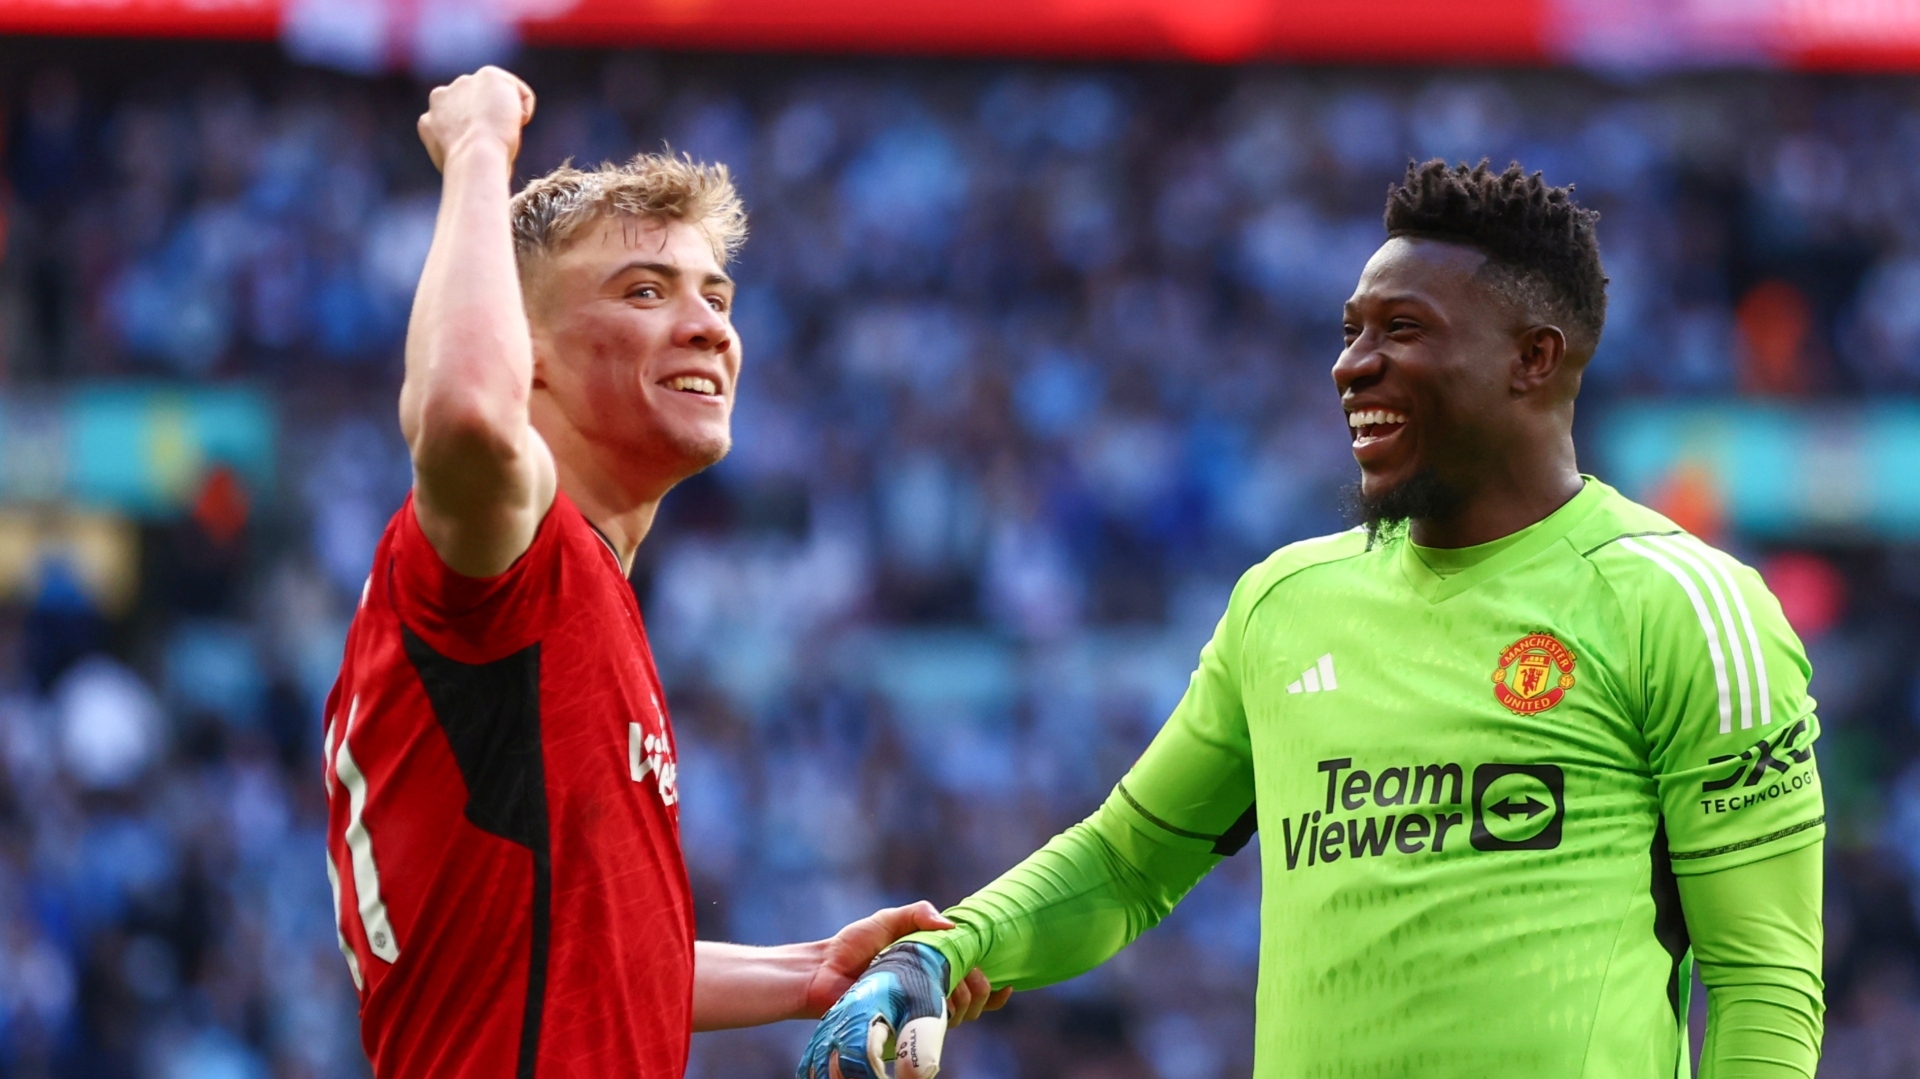 Man United win penalty shootout vs. Coventry to reach FA Cup final